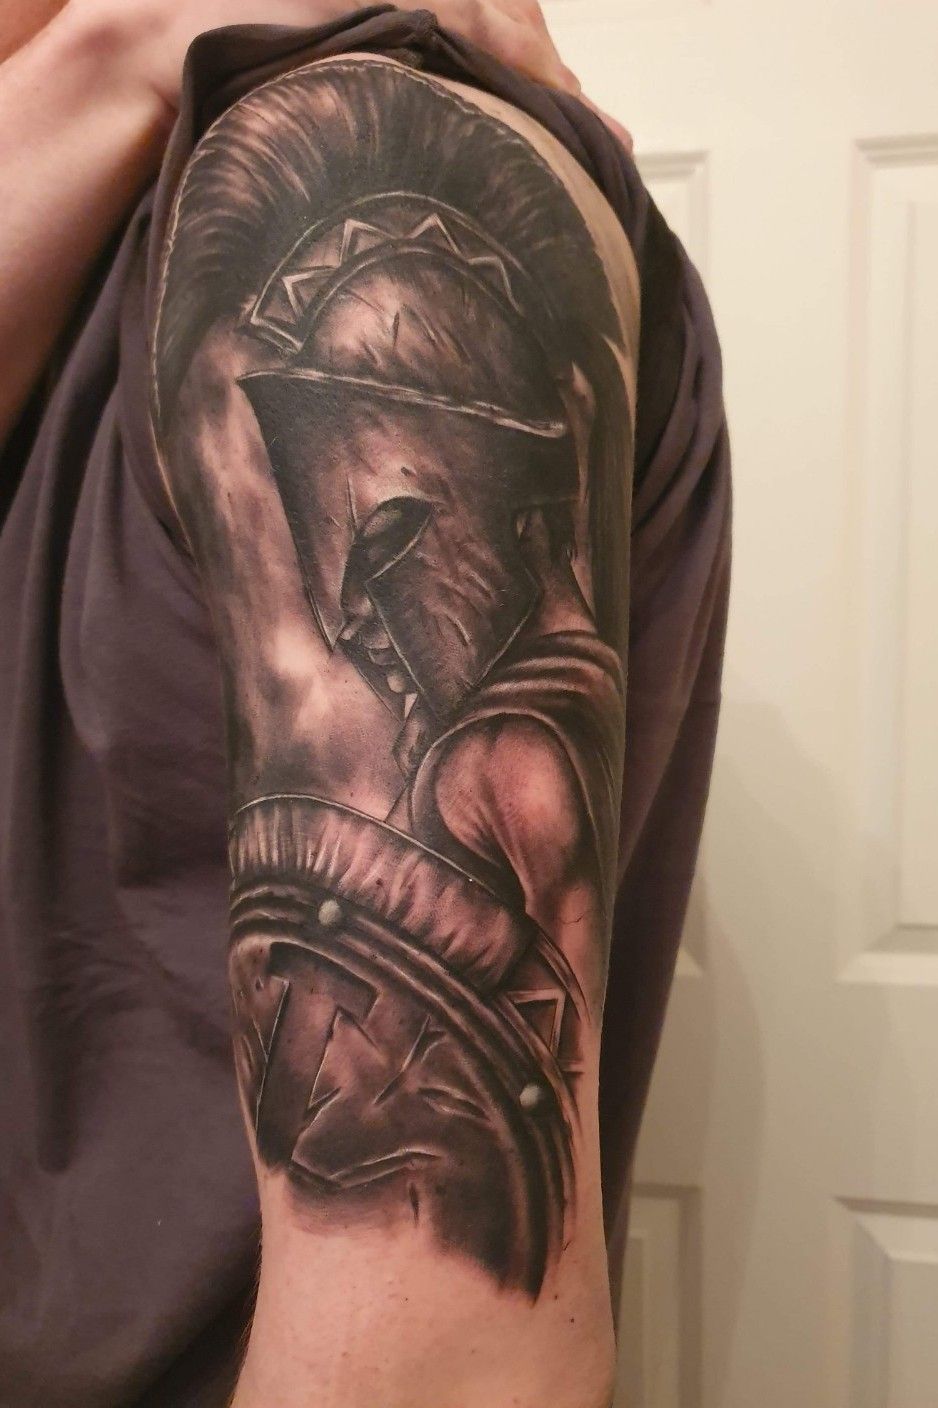 65 Masculine Spartan Tattoos For Men  Spartan Tattoo Ideas and Meaning   Tattoo Me Now